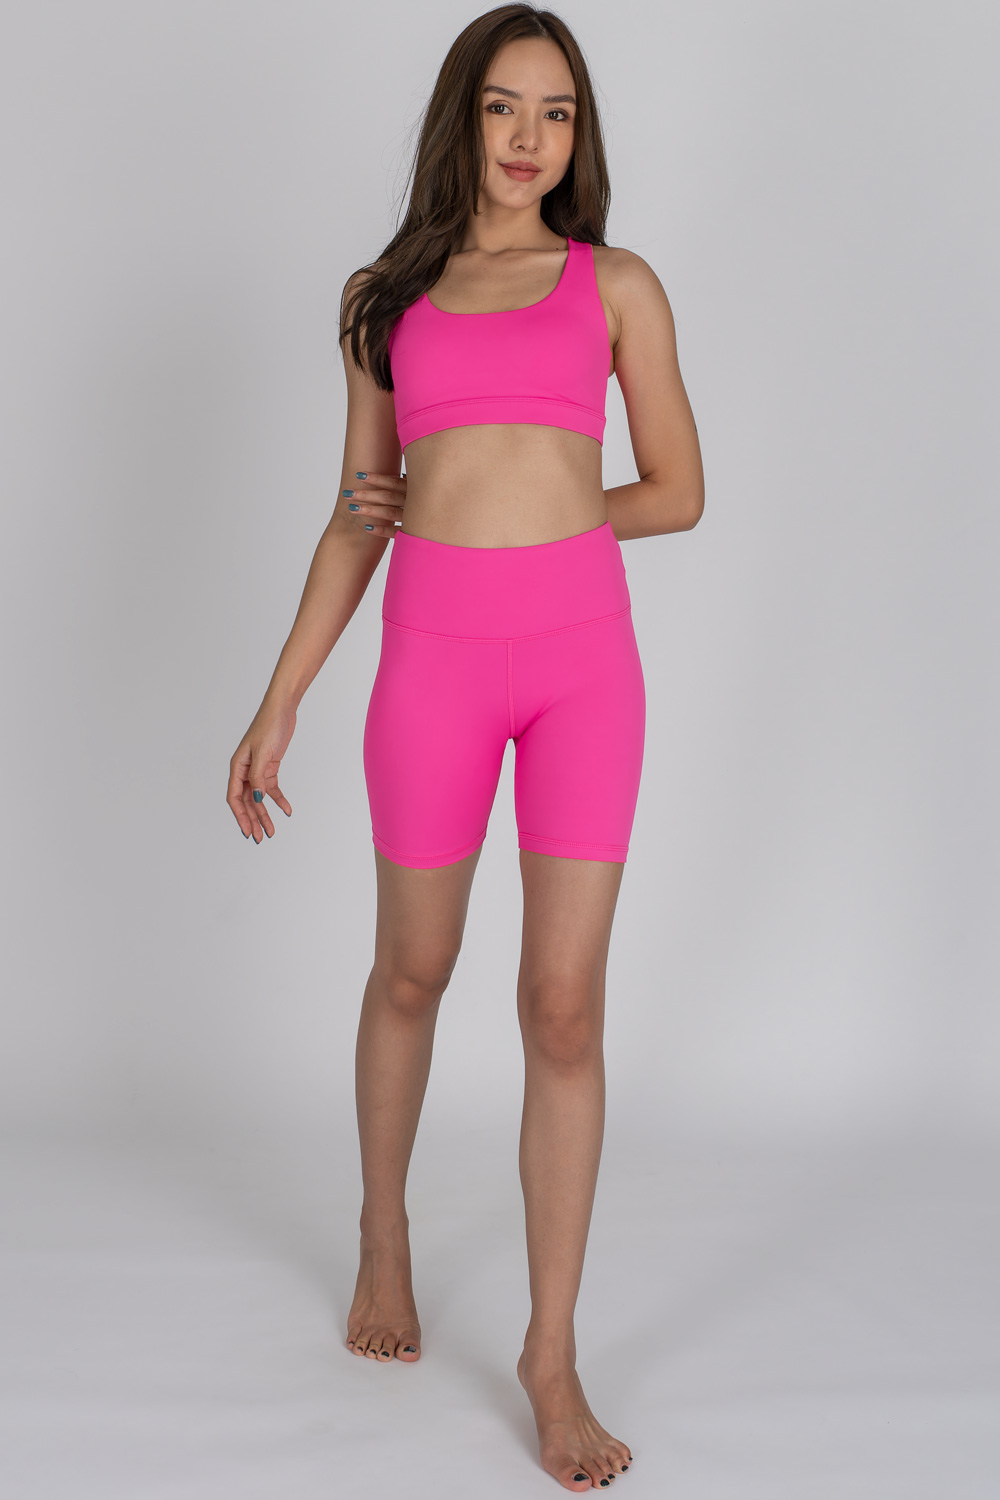 Bubble Gum Pink Fitness Shorts by Chandra Yoga & Active Wear